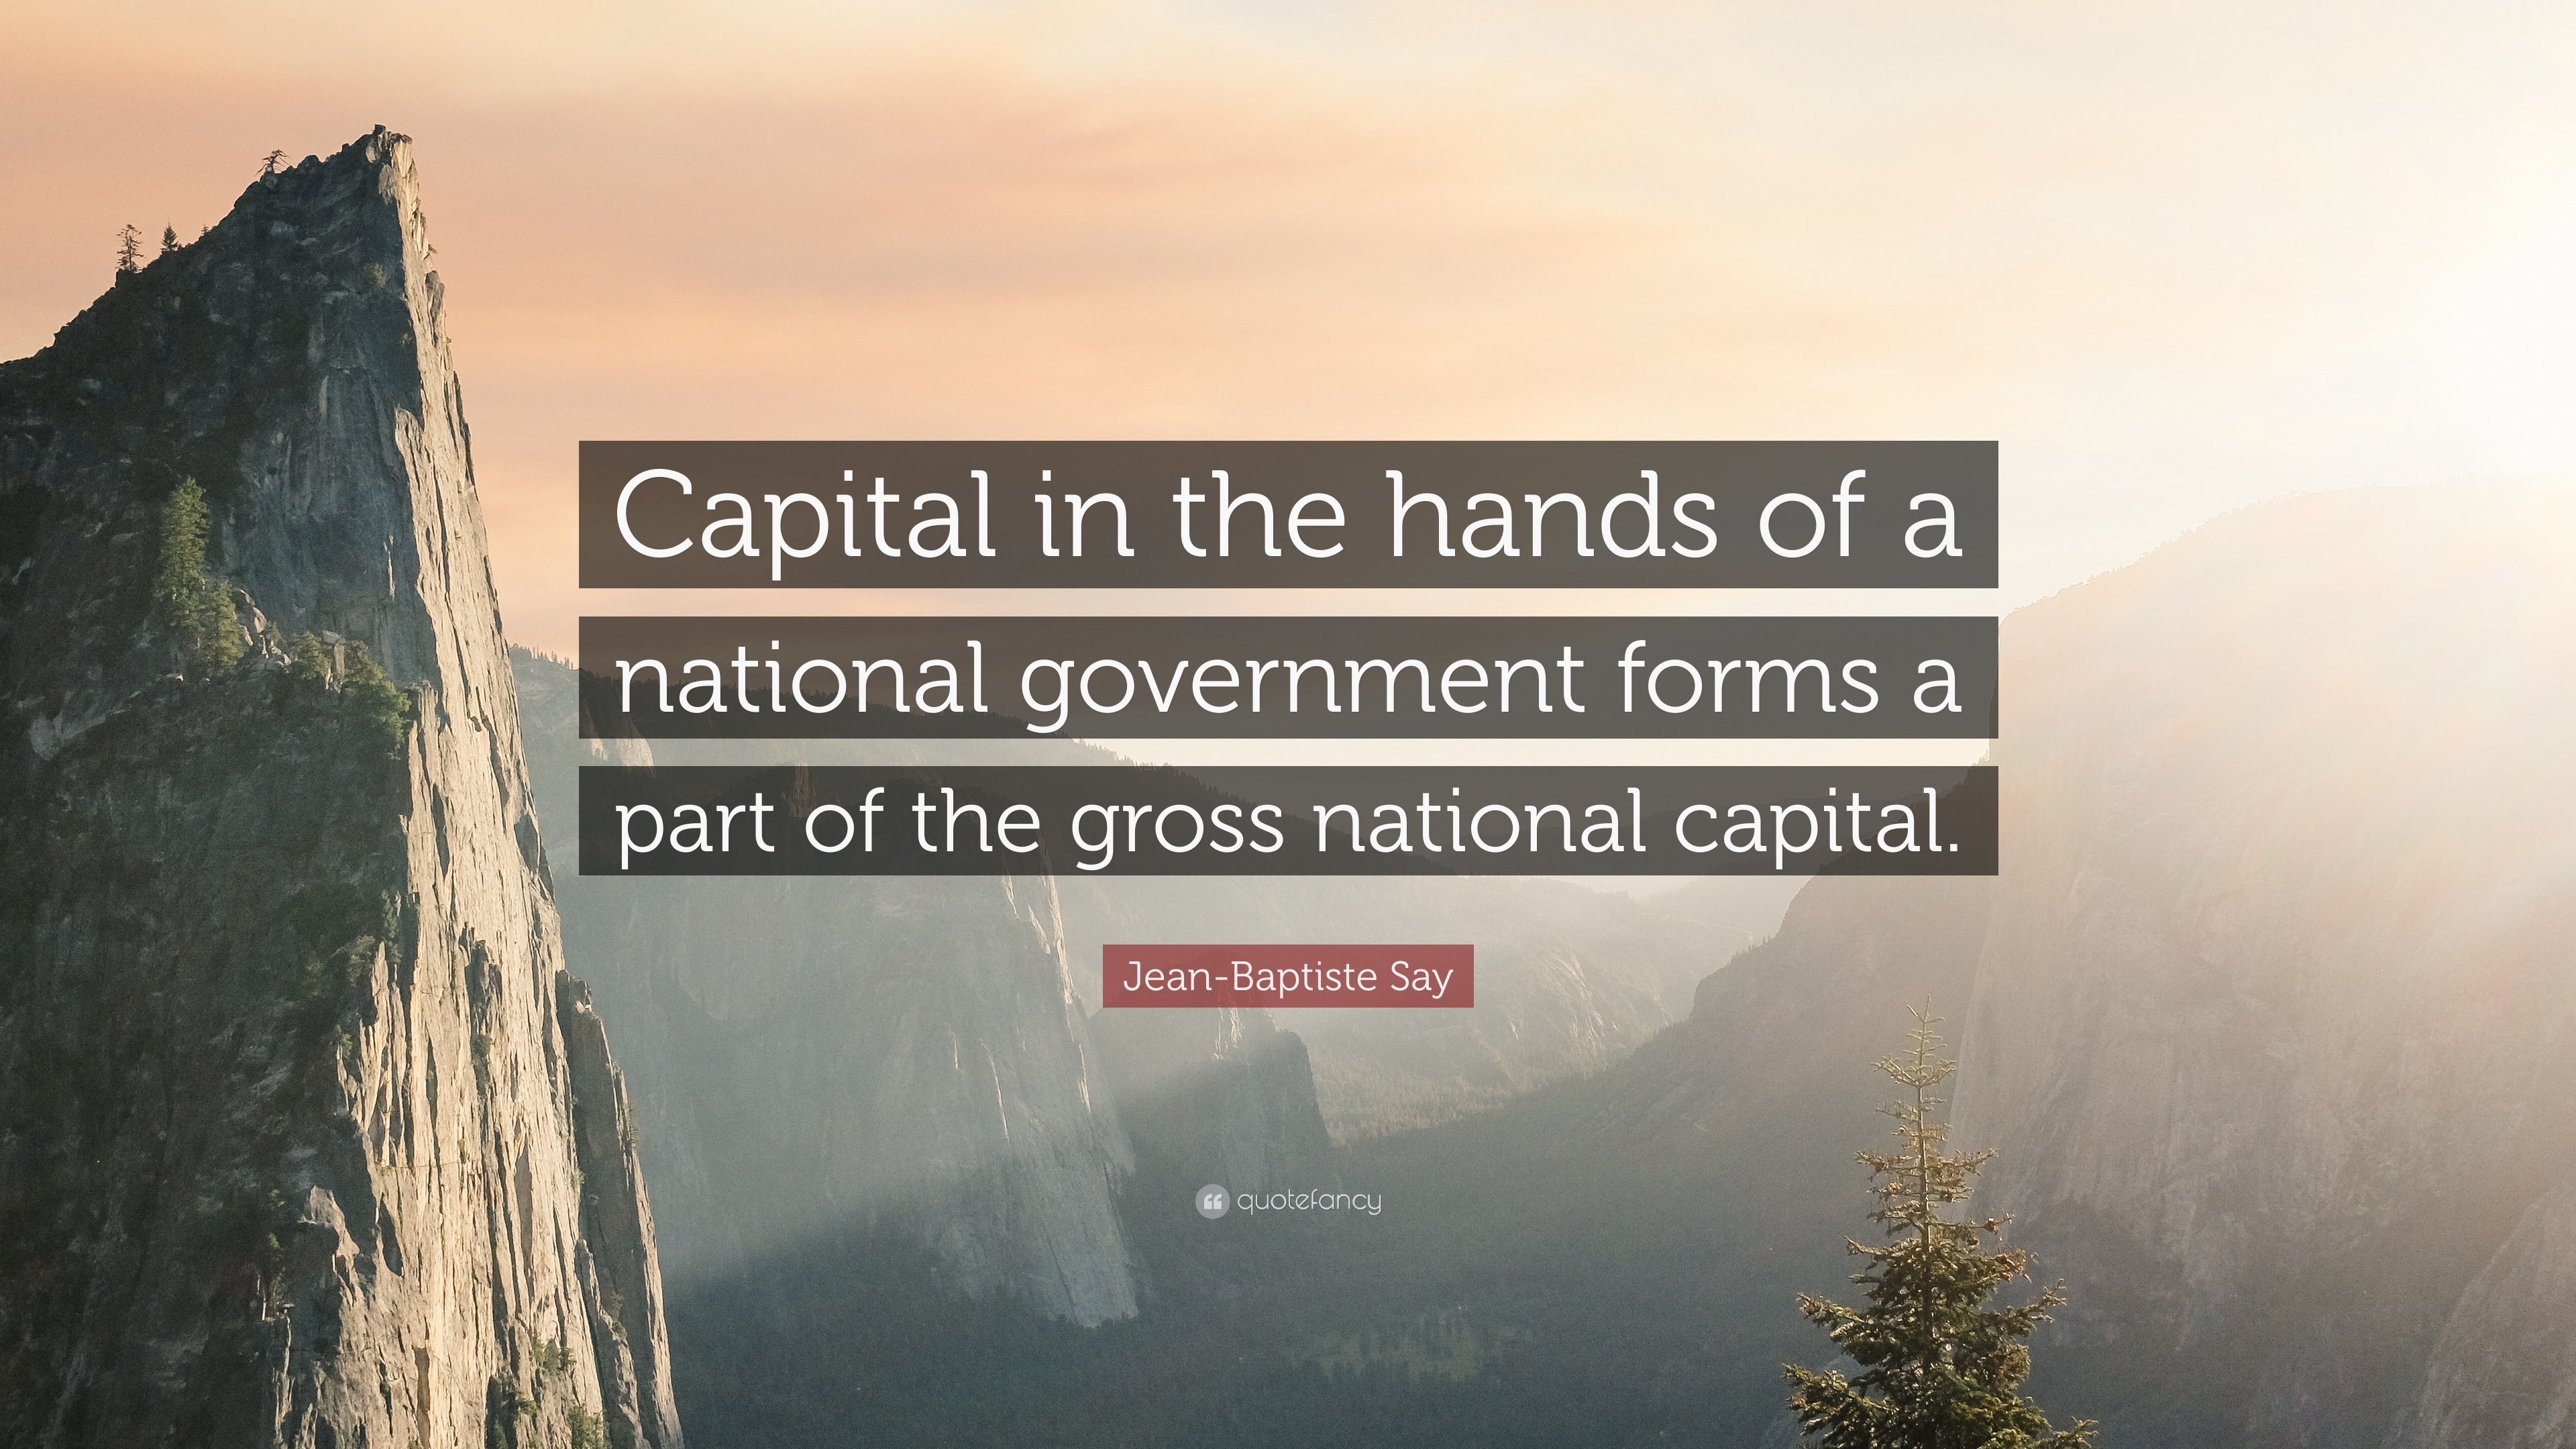 Jean-Baptiste Say Quote: “Capital in the hands of a national forms part of